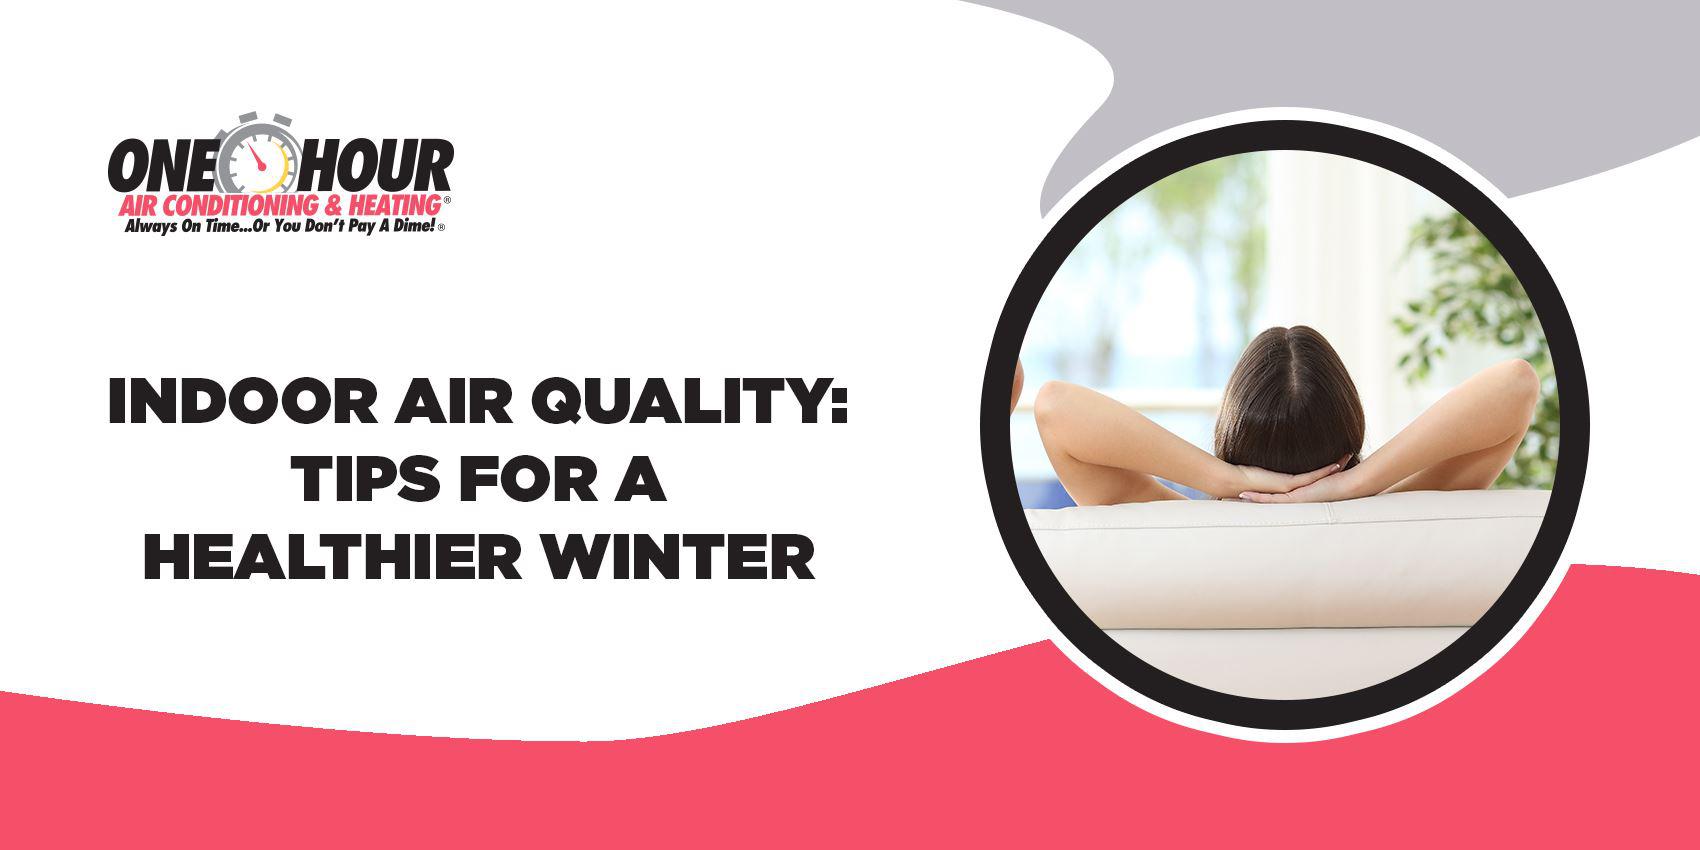 Indoor Air Quality: Tips for A Healthier Winter